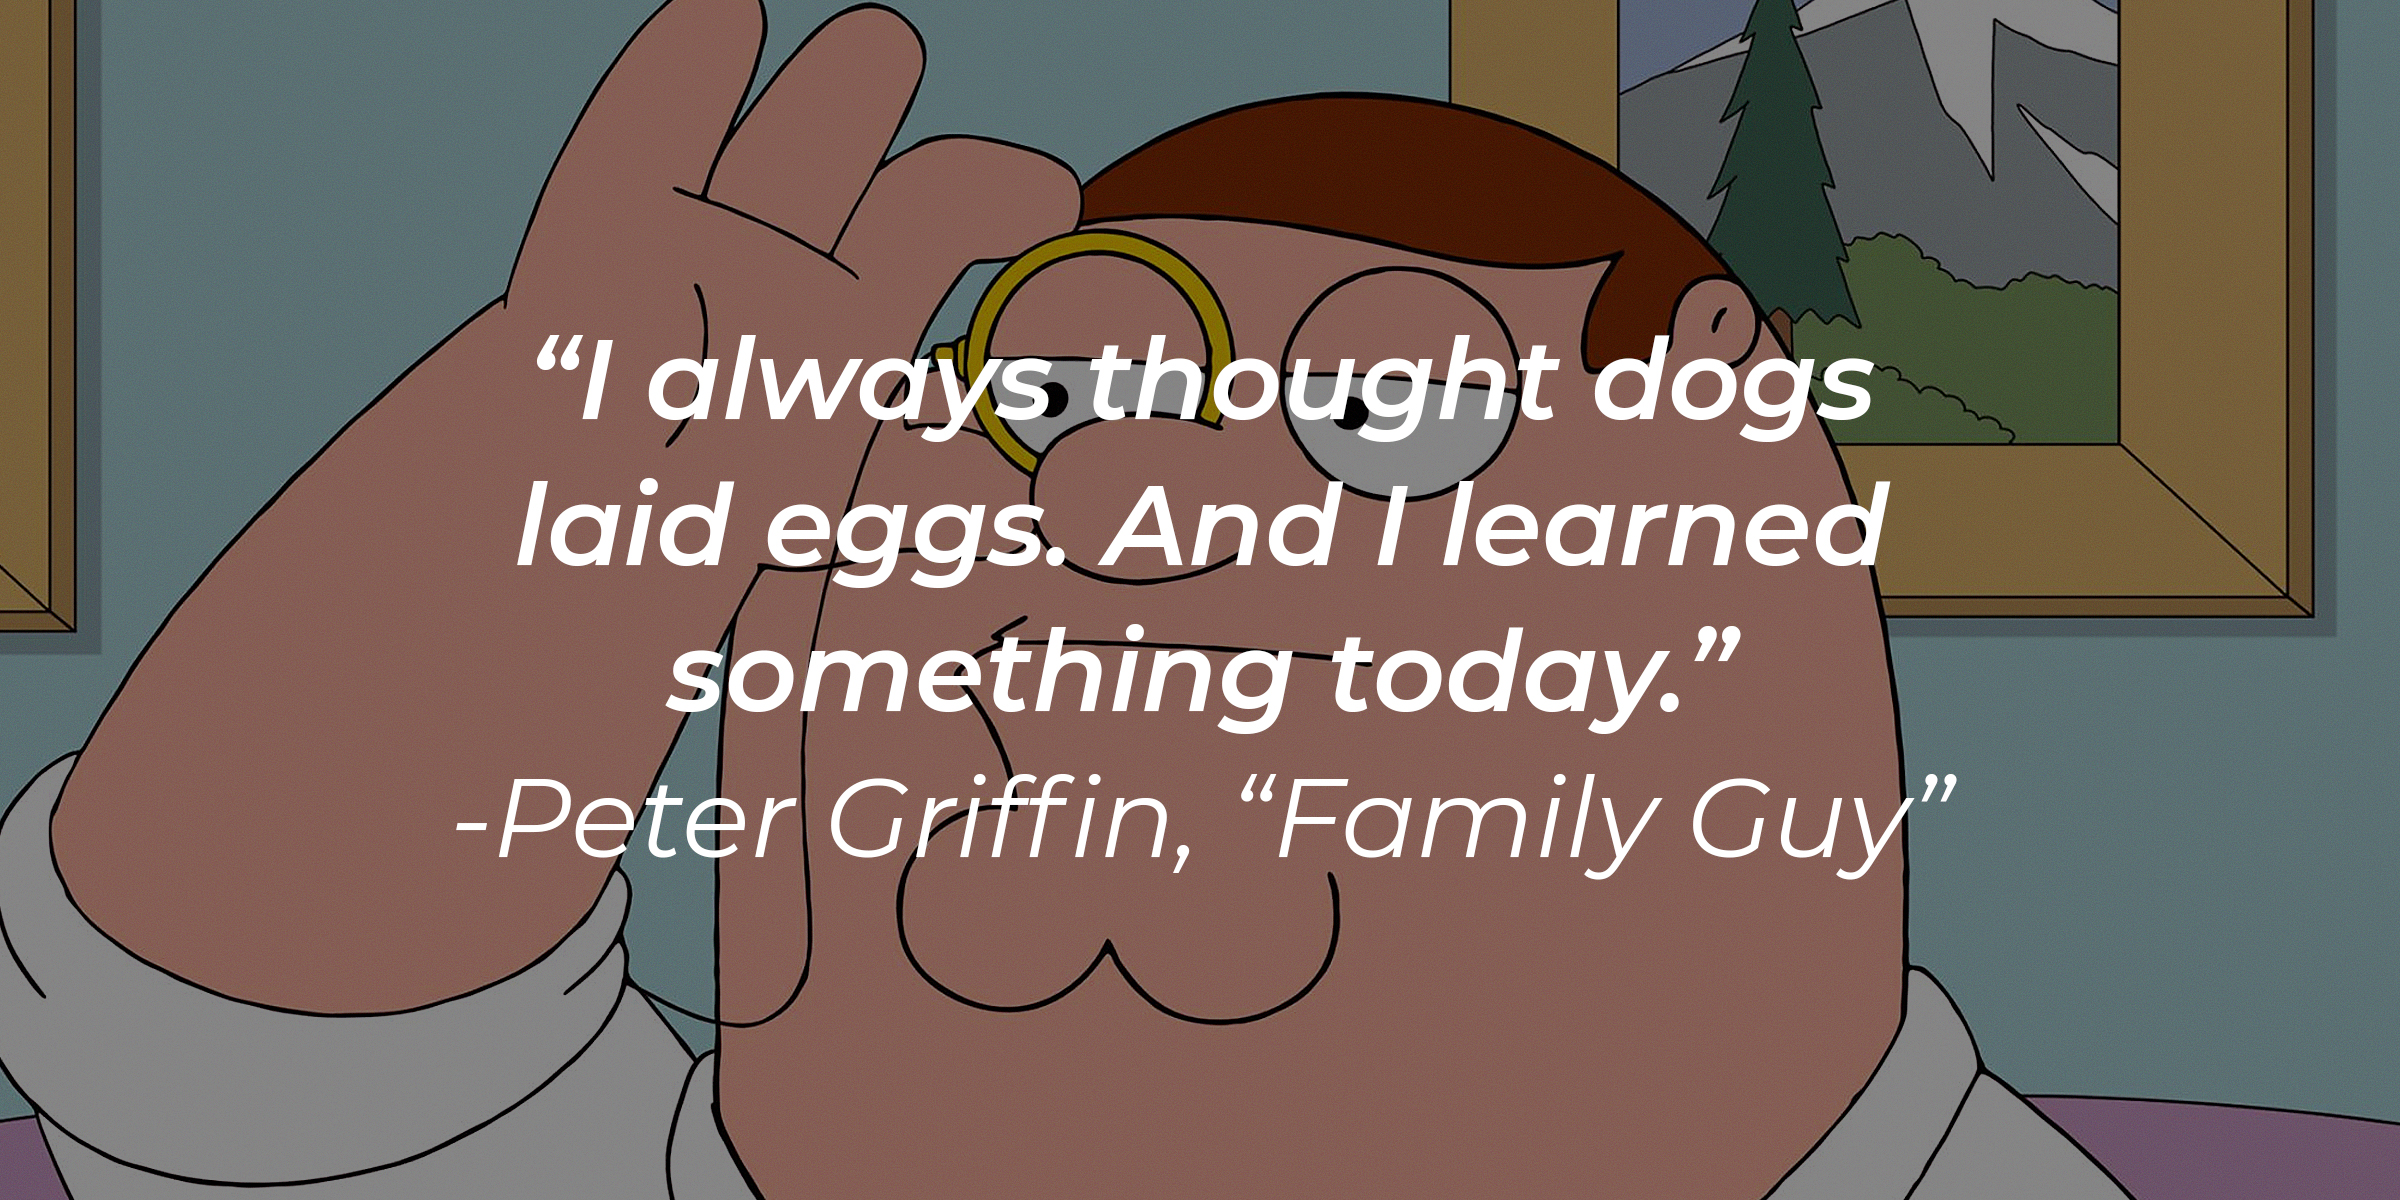 An image of Peter Griffin in "Family Guy" with his quote: "I always thought dogs laid eggs. And I learned something today." | Source: facebook.com/FamilyGuy